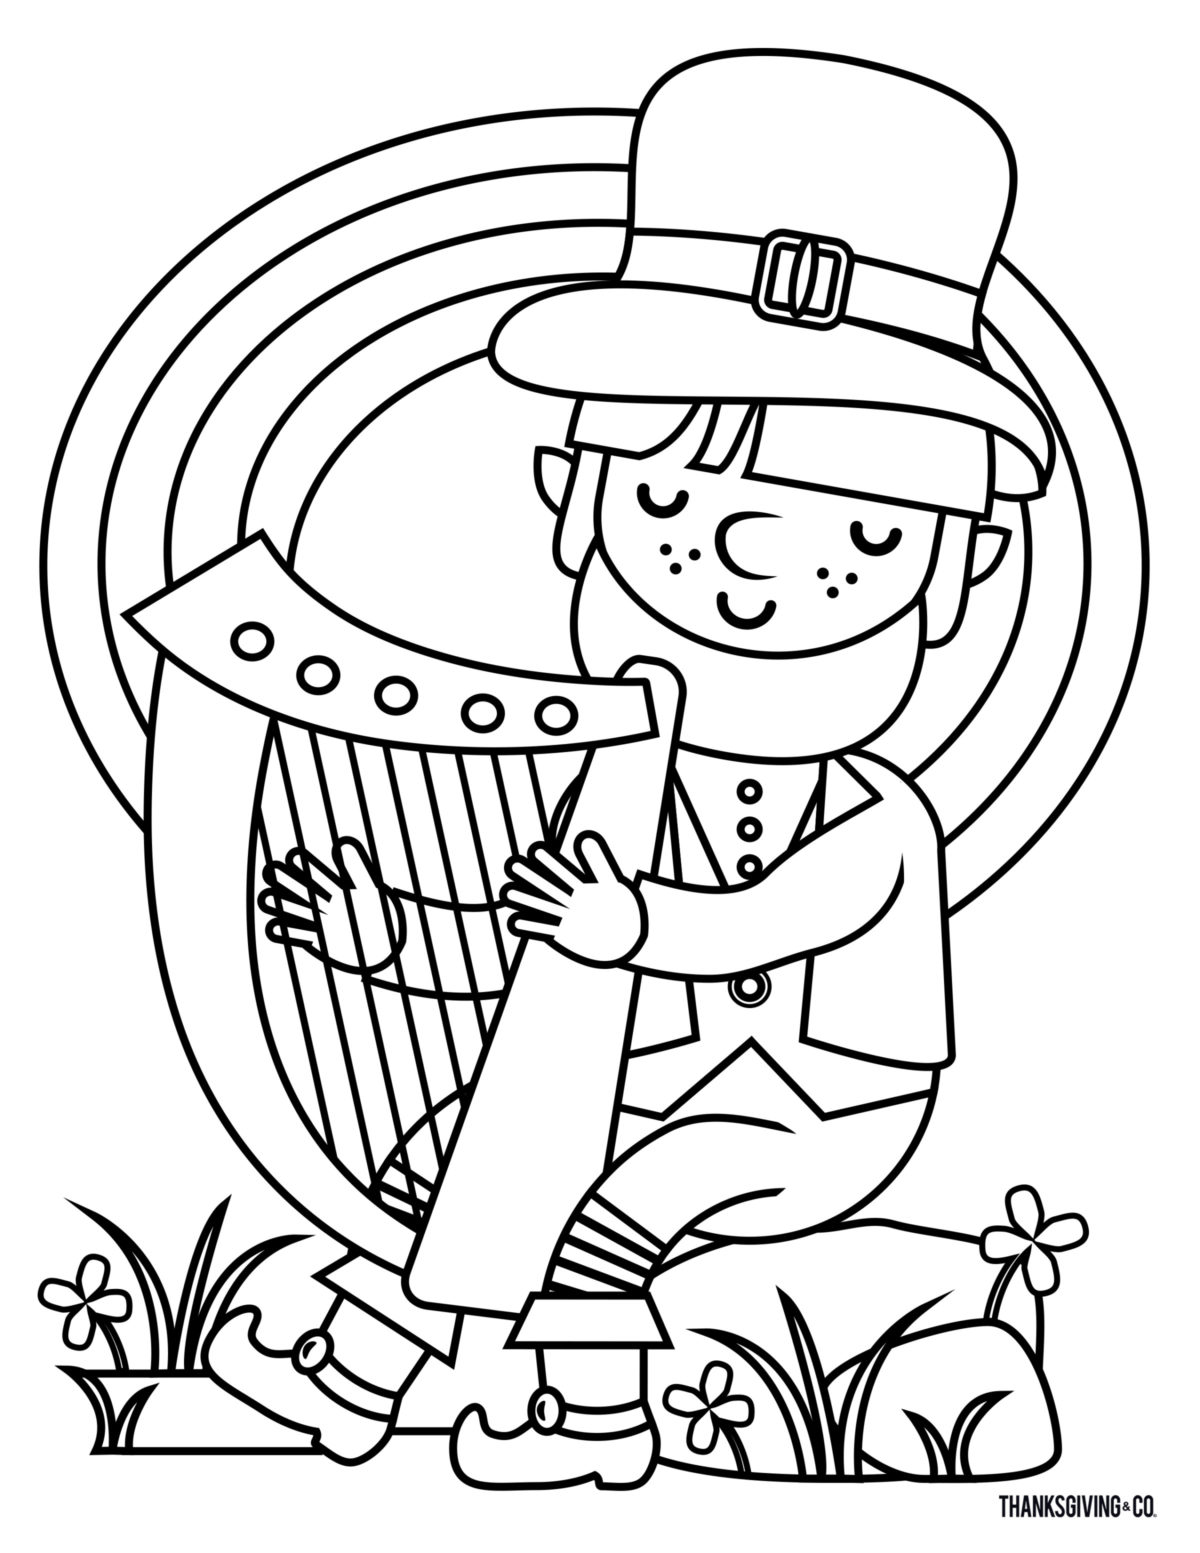 St.Patricks Day Coloring Book - Leprechaun playing a Celtic harp